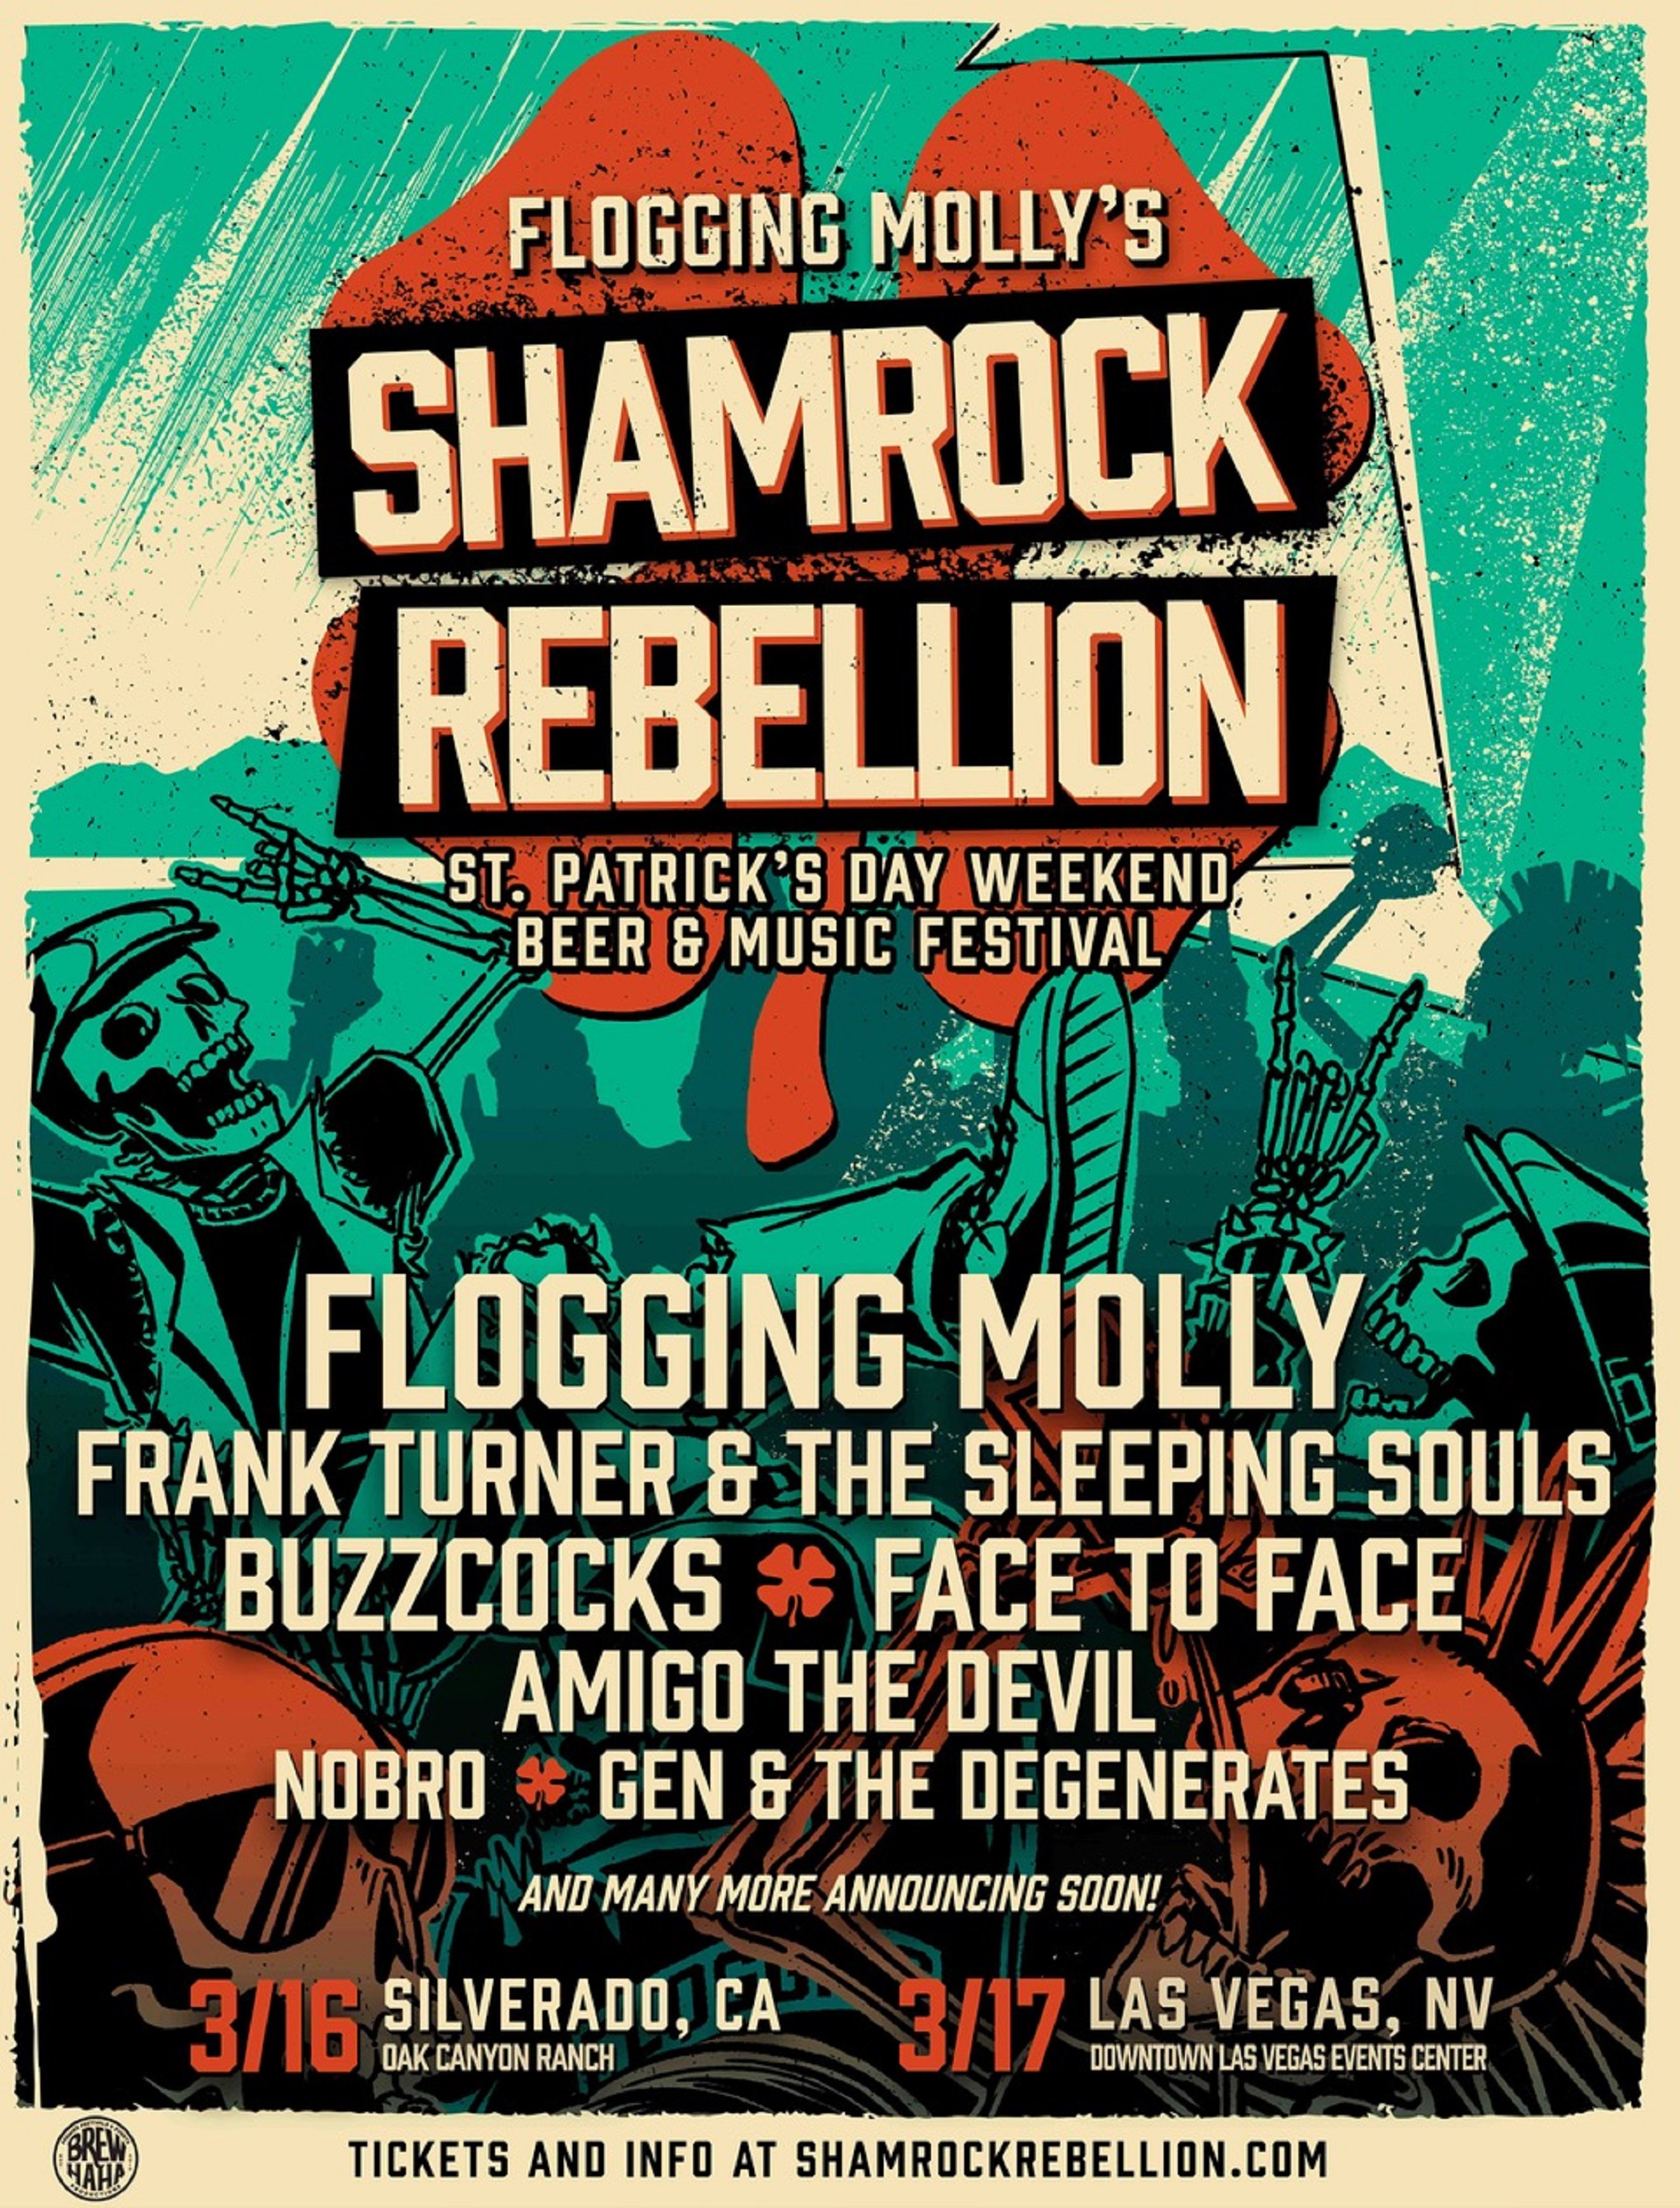 Flogging Molly’s Shamrock Rebellion - St. Patrick’s Day Weekend Events In Southern CA & Las Vegas